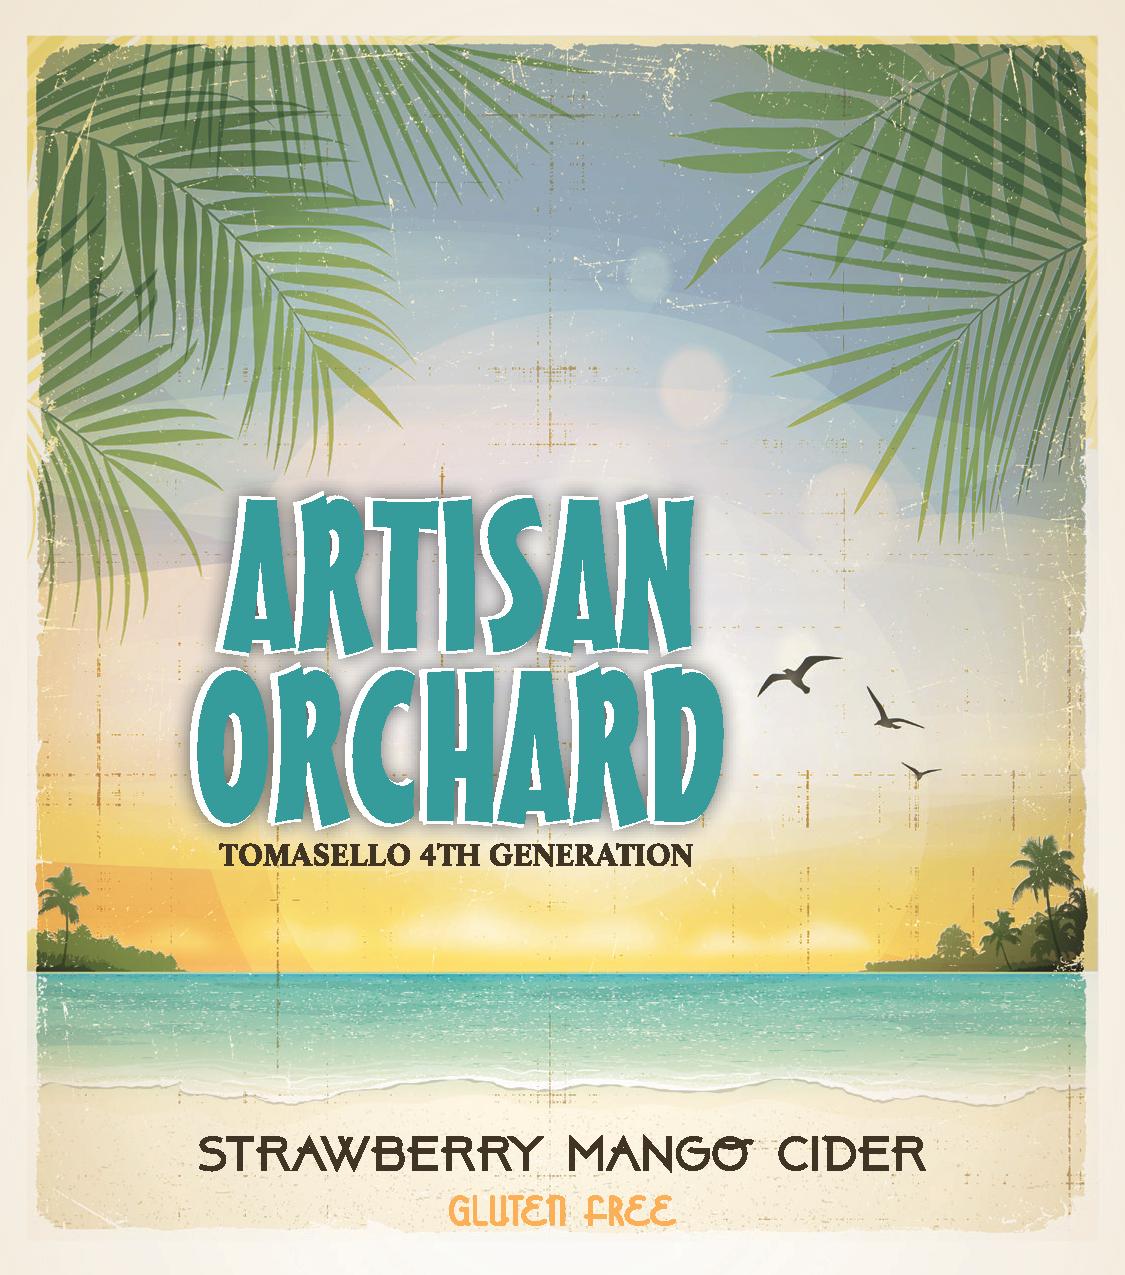 Product Image for Artisan Orchard Strawberry Mango Cider